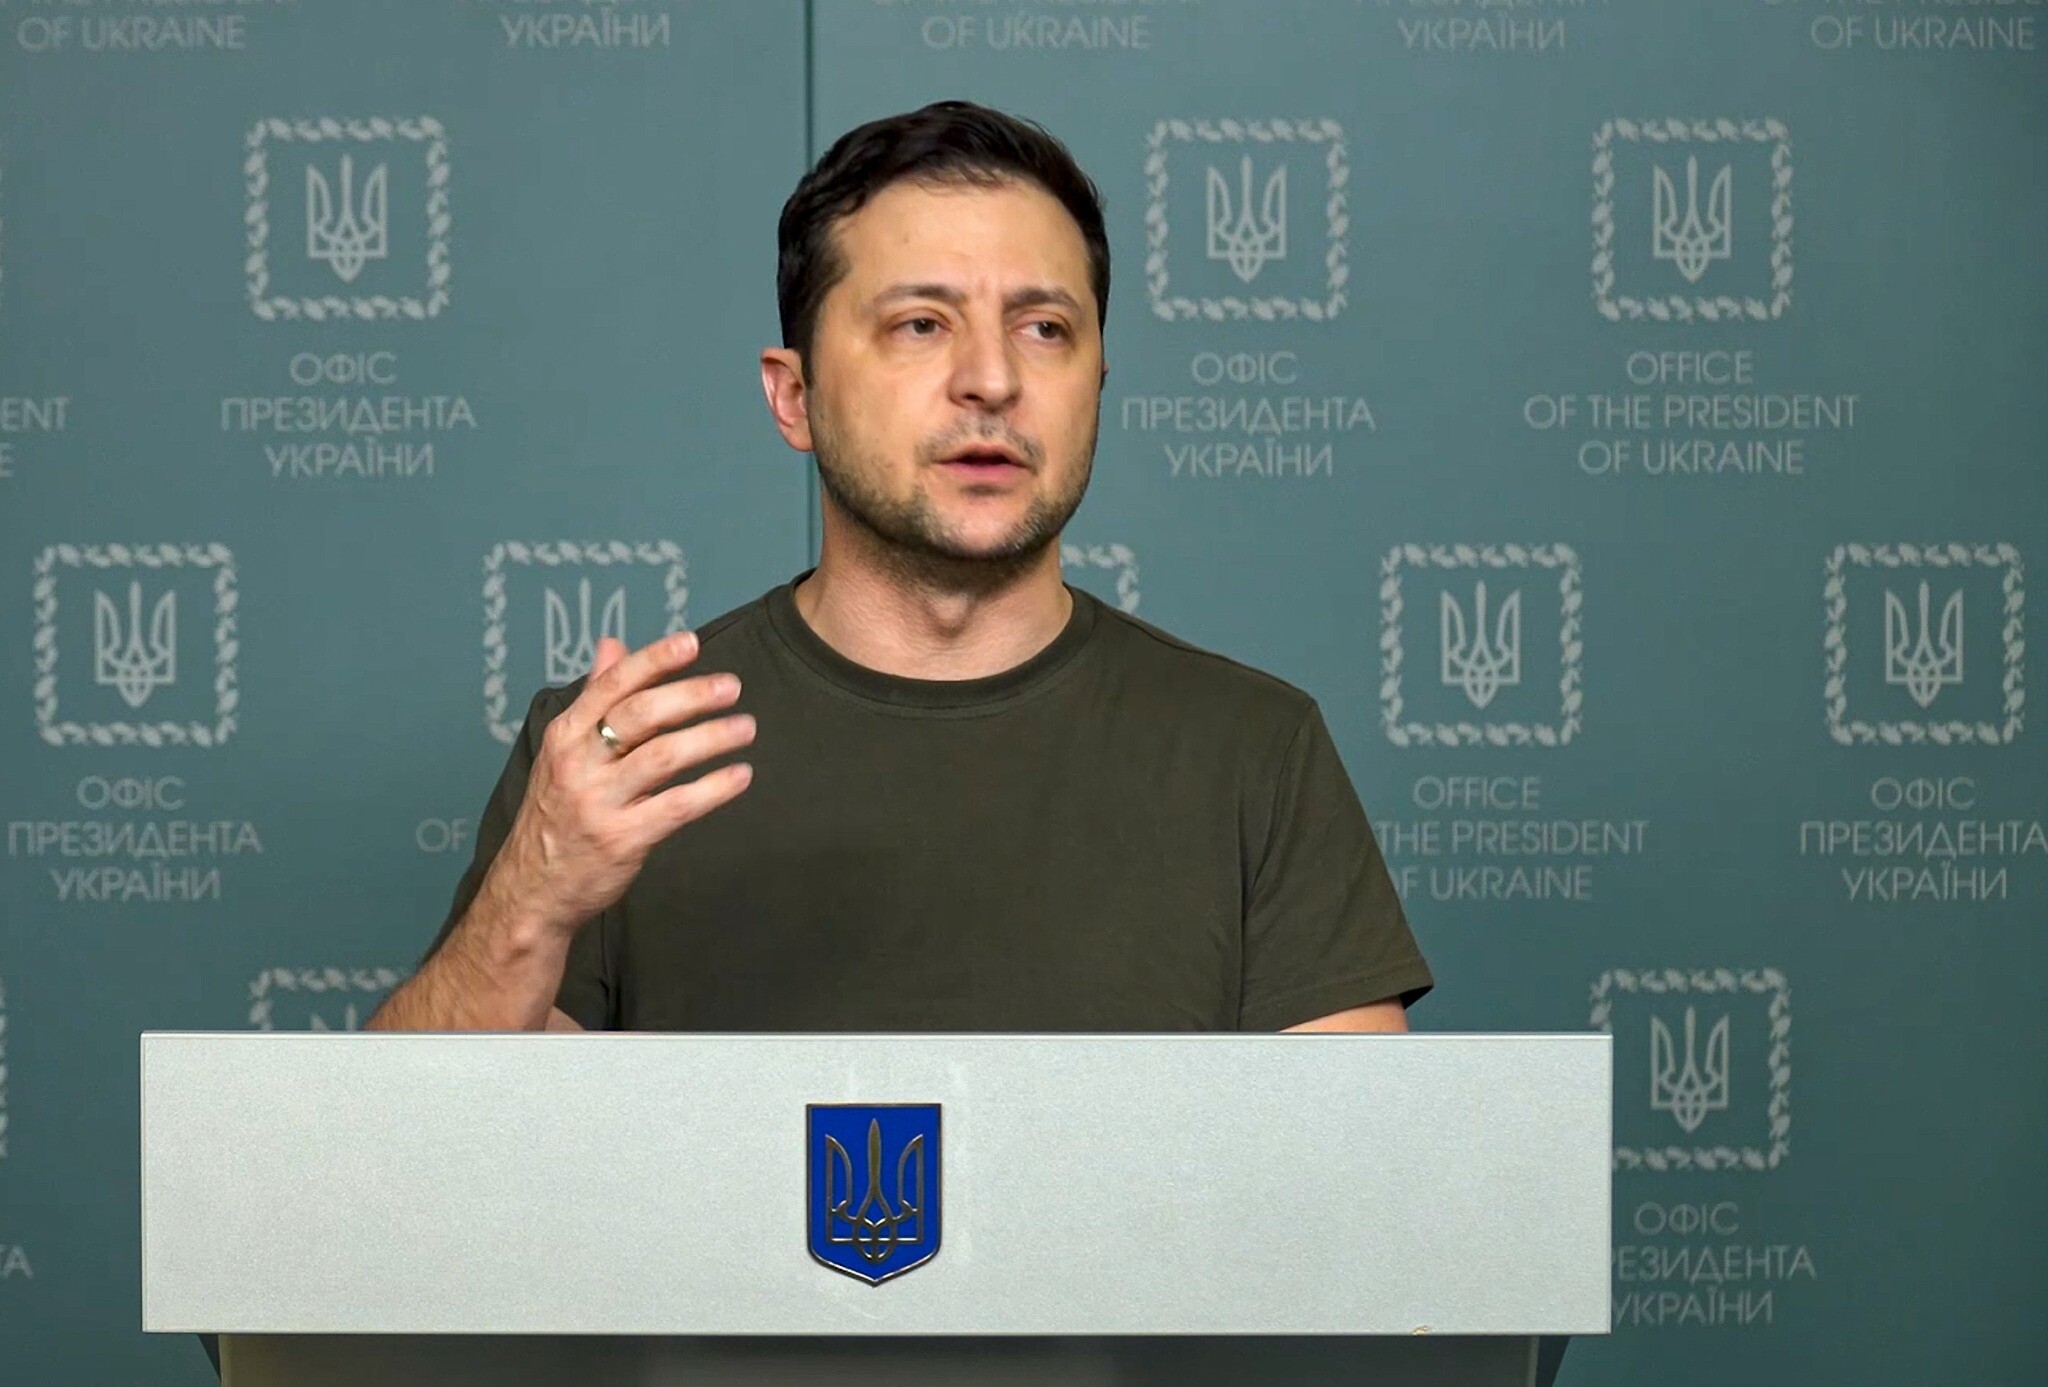 Zelensky says next 24 hours are 'crucial' for Ukraine amid fight